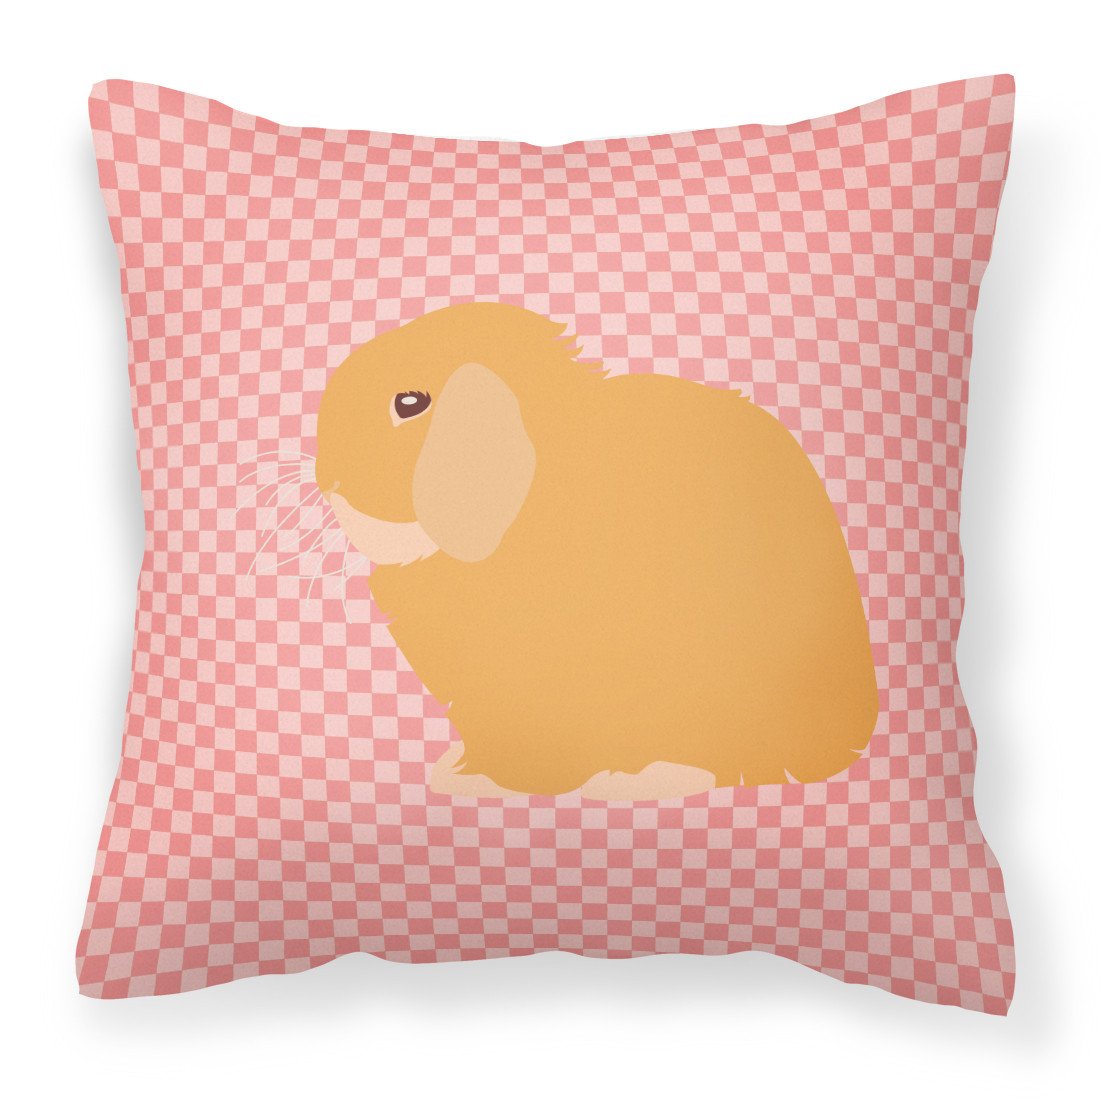 Holland Lop Rabbit Pink Check Fabric Decorative Pillow BB7968PW1818 by Caroline's Treasures